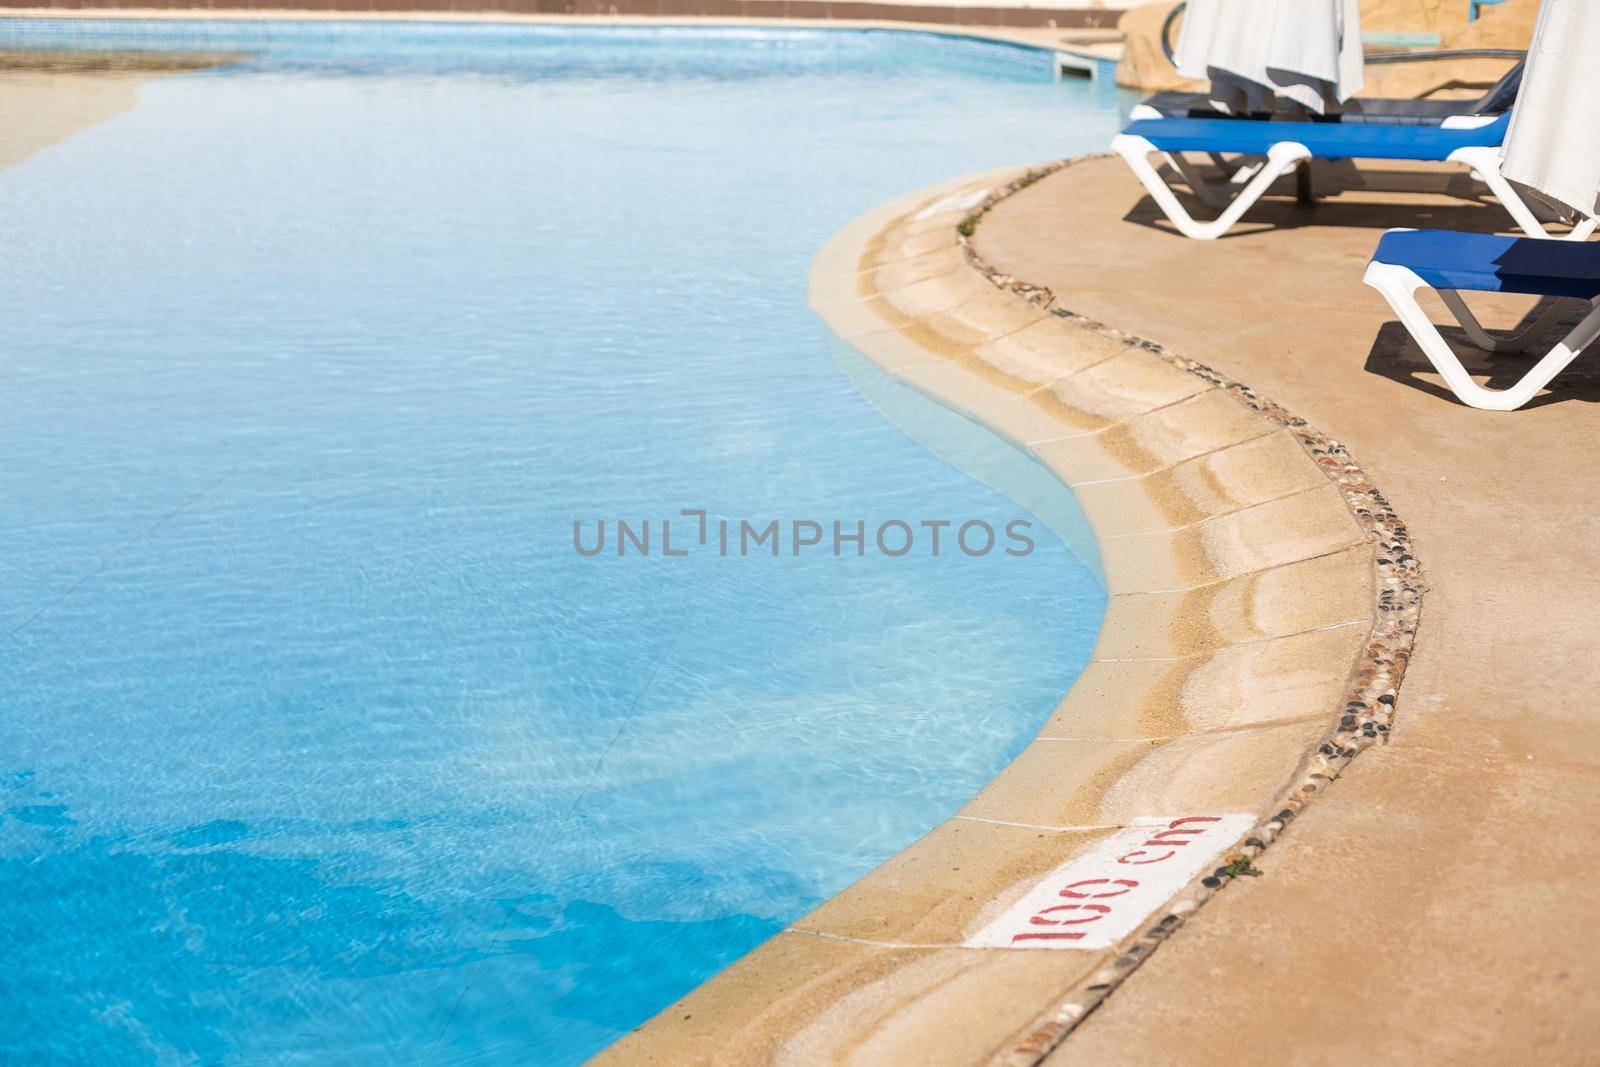 surface of blue swimming pool, background of water in swimming pool. by Andelov13